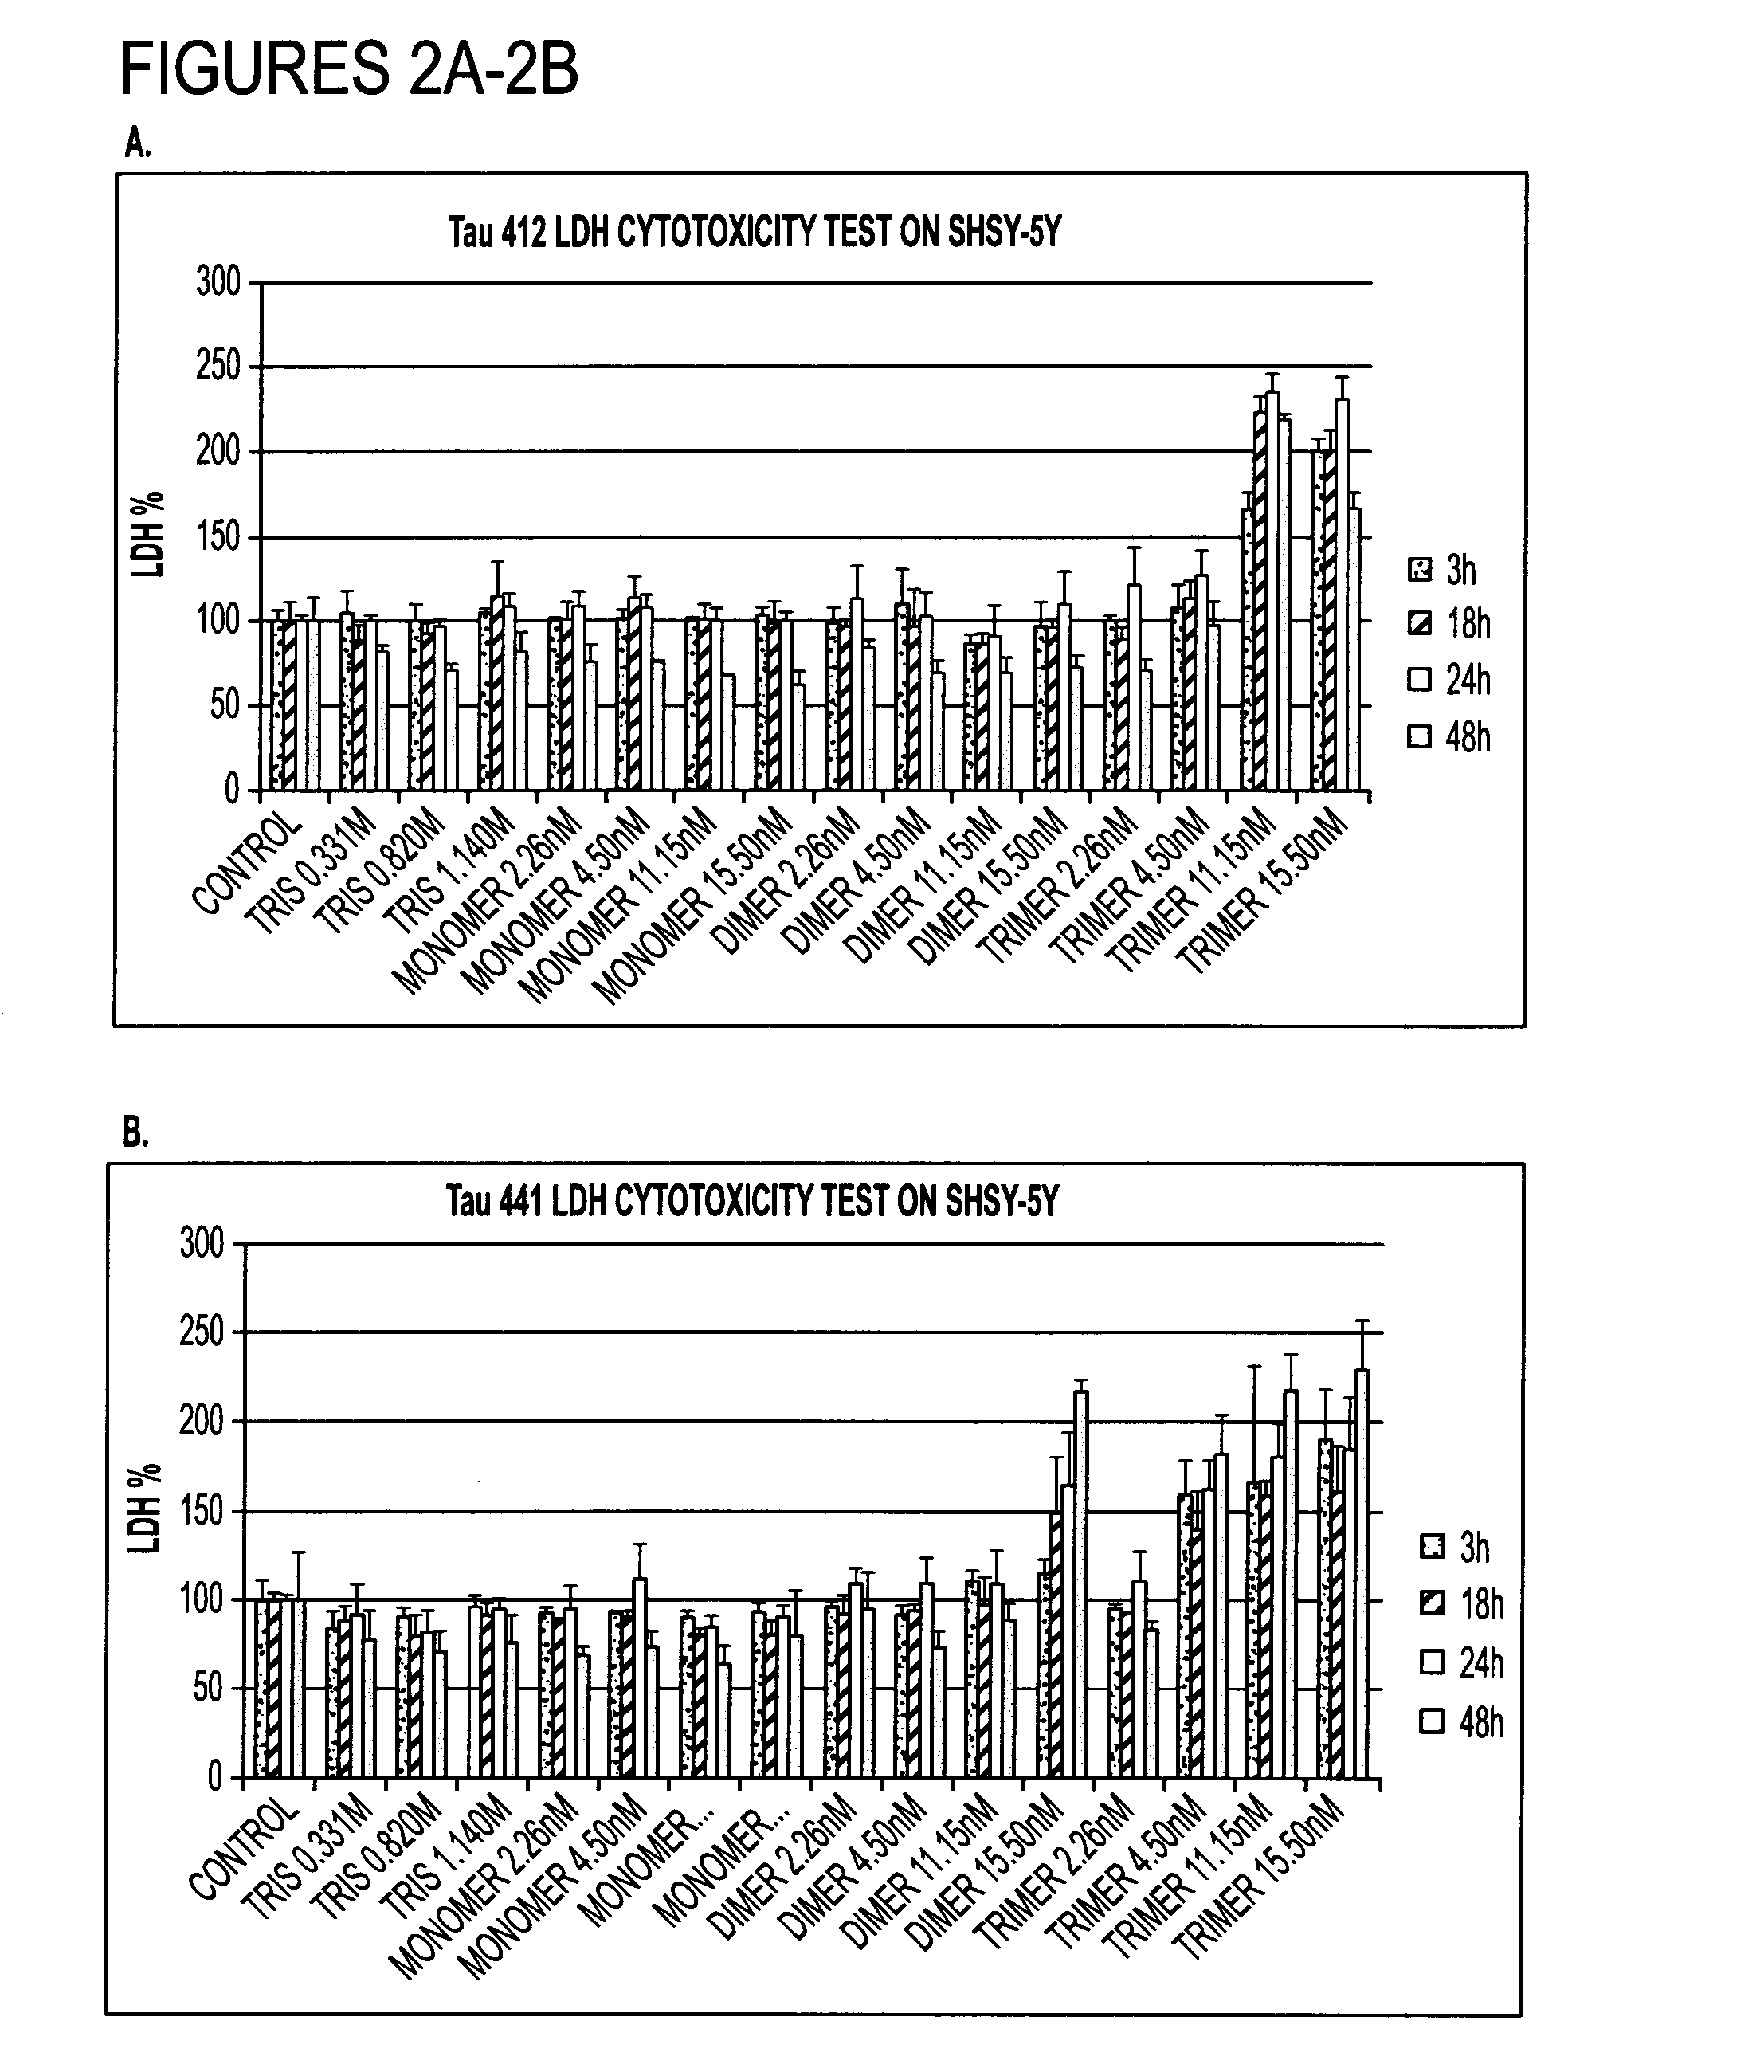 Antibody based reagents that specifically recognize toxic oligomeric forms of tau